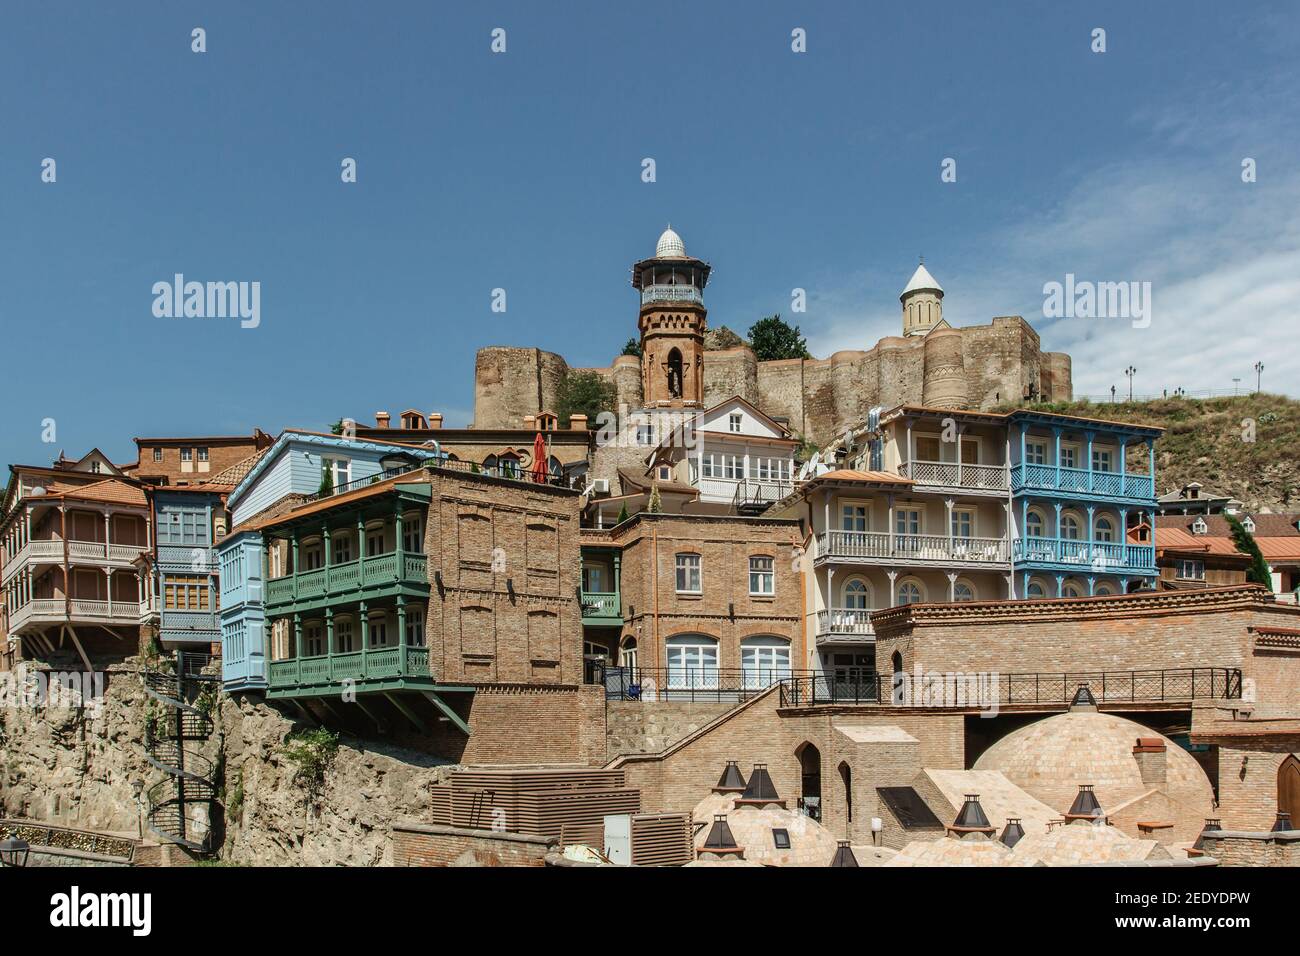 Colorful traditional houses with wooden carved balconies in the Old Town of Tbilisi, Georgia.View and Architecture of the Old Town.Abanotubani Stock Photo